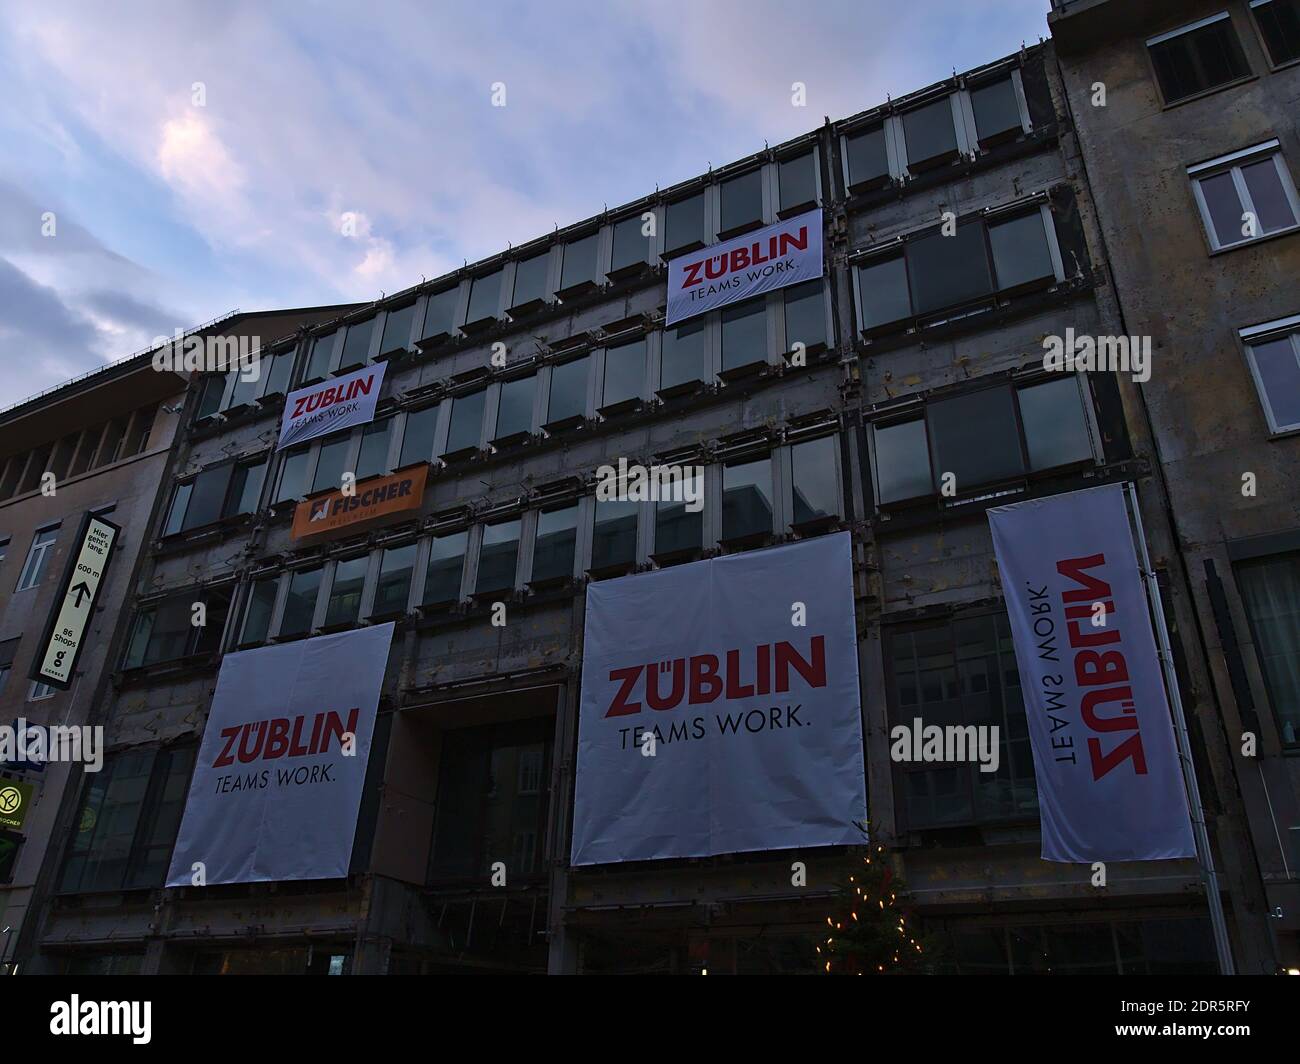 Construction site in shopping street Königstraße in downtown with banners of construction company Züblin, part of Strabag Group, in evening light. Stock Photo